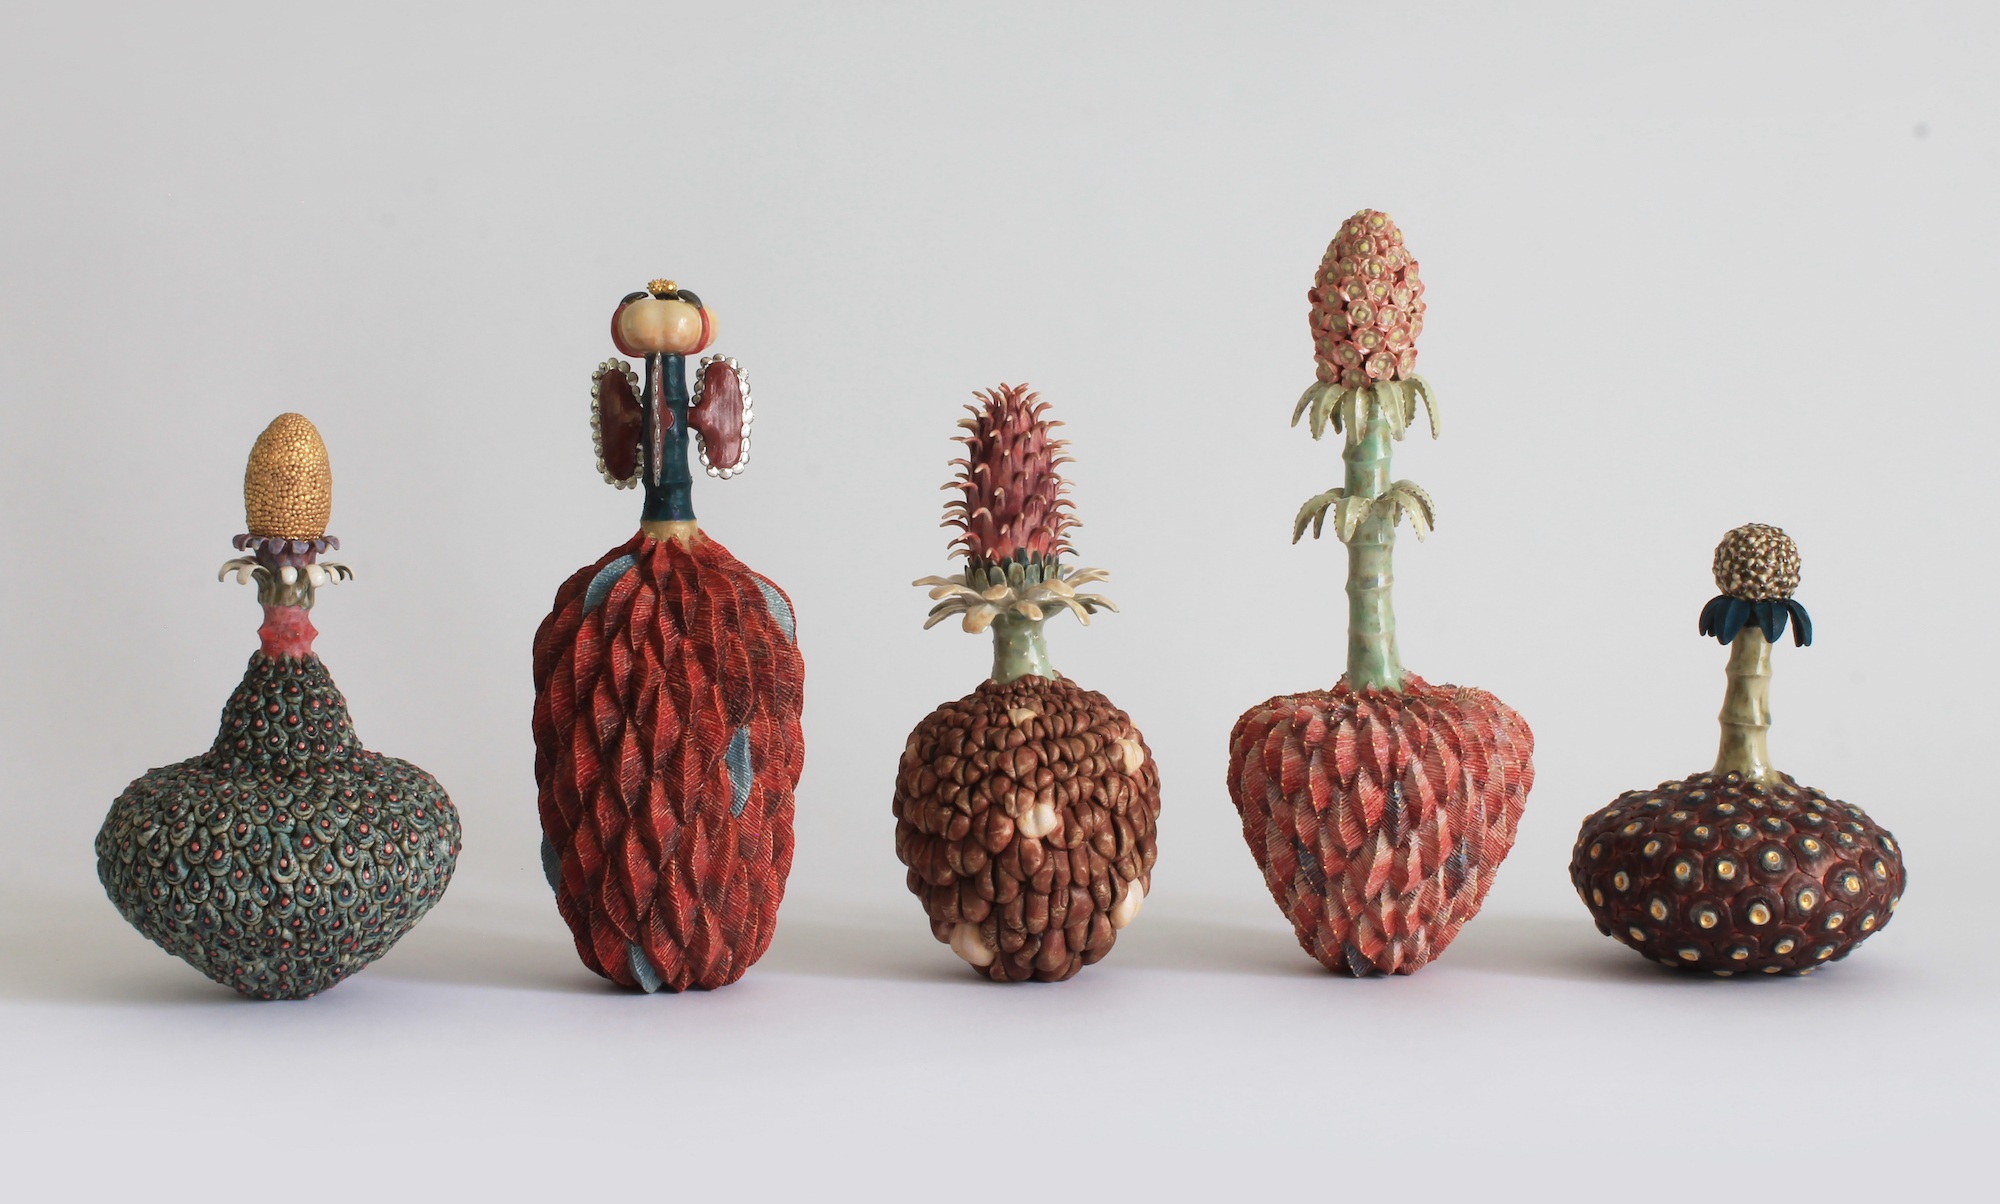 An display of five ceramic sculptures inspired by plants and flowers.